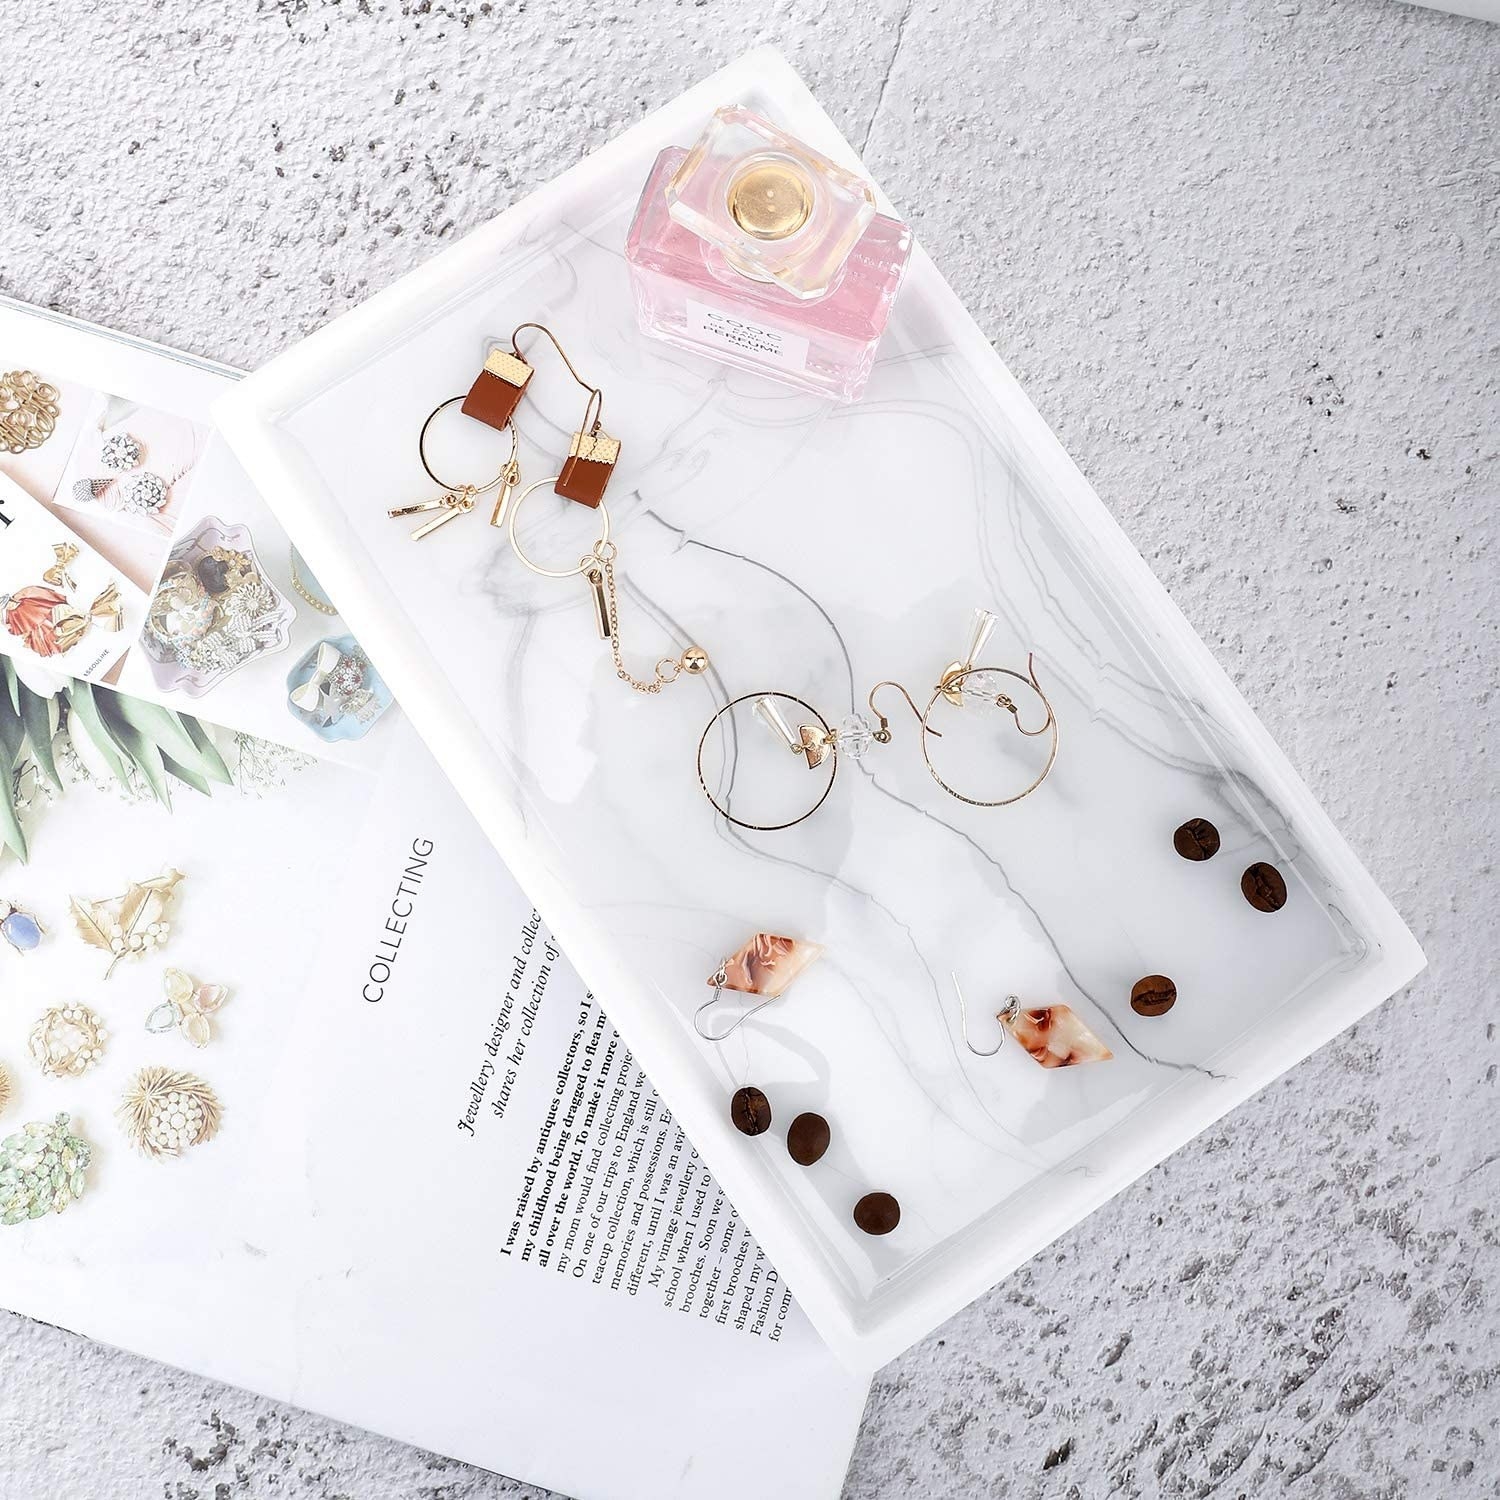 An flatlay of the catch all tray filled with jewelry and coffee beans